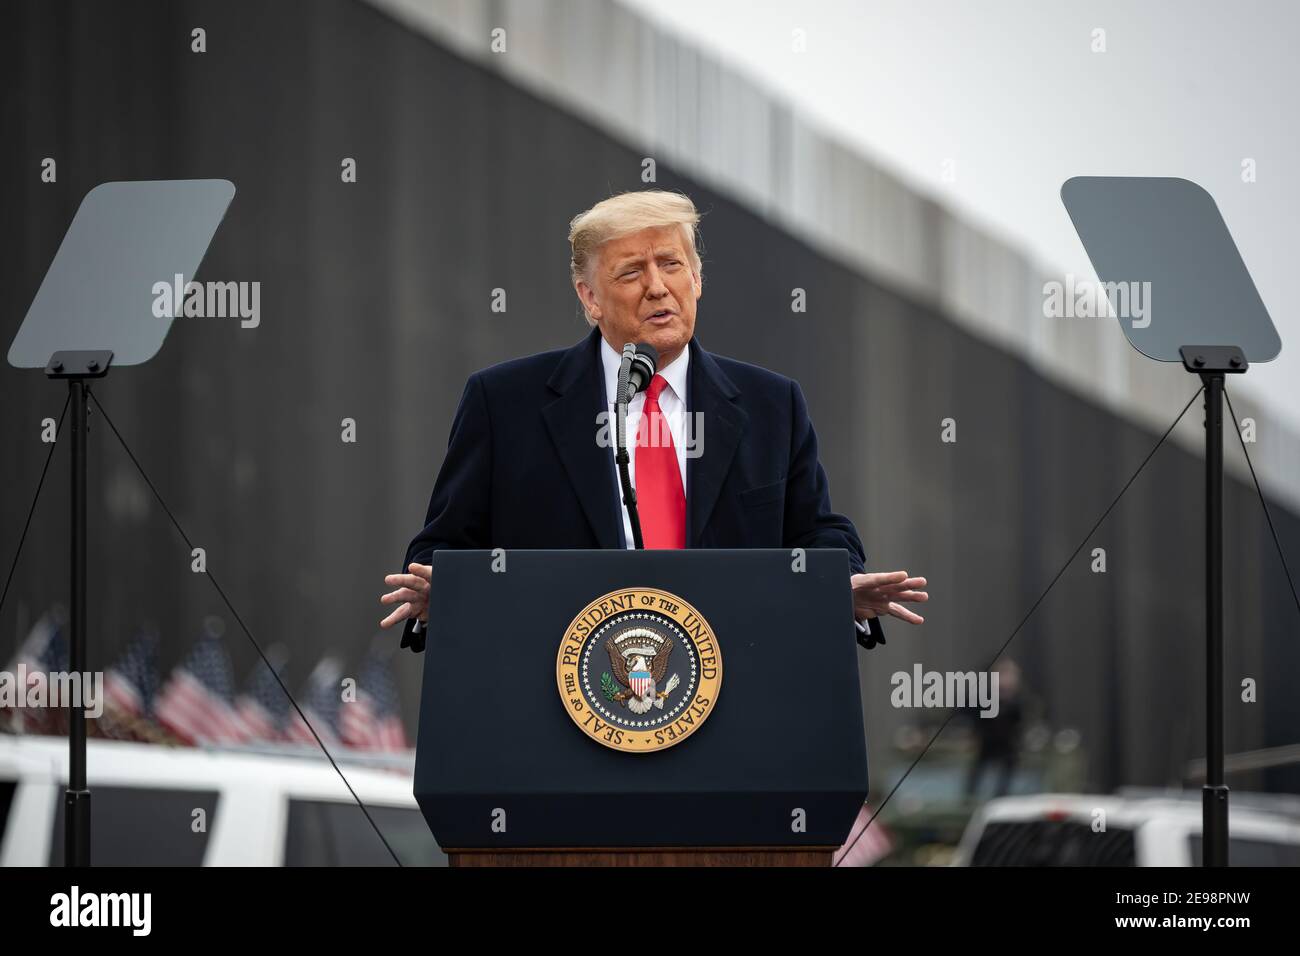 PRESIDENT DONALD TRUMP VISITS THE BORDER WALL WITH MEXICO DURING THE LAST DAYS OF HIS PRESIDENCY. The Mexico–United States barrier, also known as the border wall, is a series of vertical barriers along the Mexico–United States border intended to reduce illegal immigration to the United States from Mexico. The barrier is not a continuous structure but a series of obstructions variously classified as 'fences' or 'walls'.  Between the physical barriers, security is provided by a 'virtual fence' of sensors, cameras, and other surveillance equipment. Stock Photo